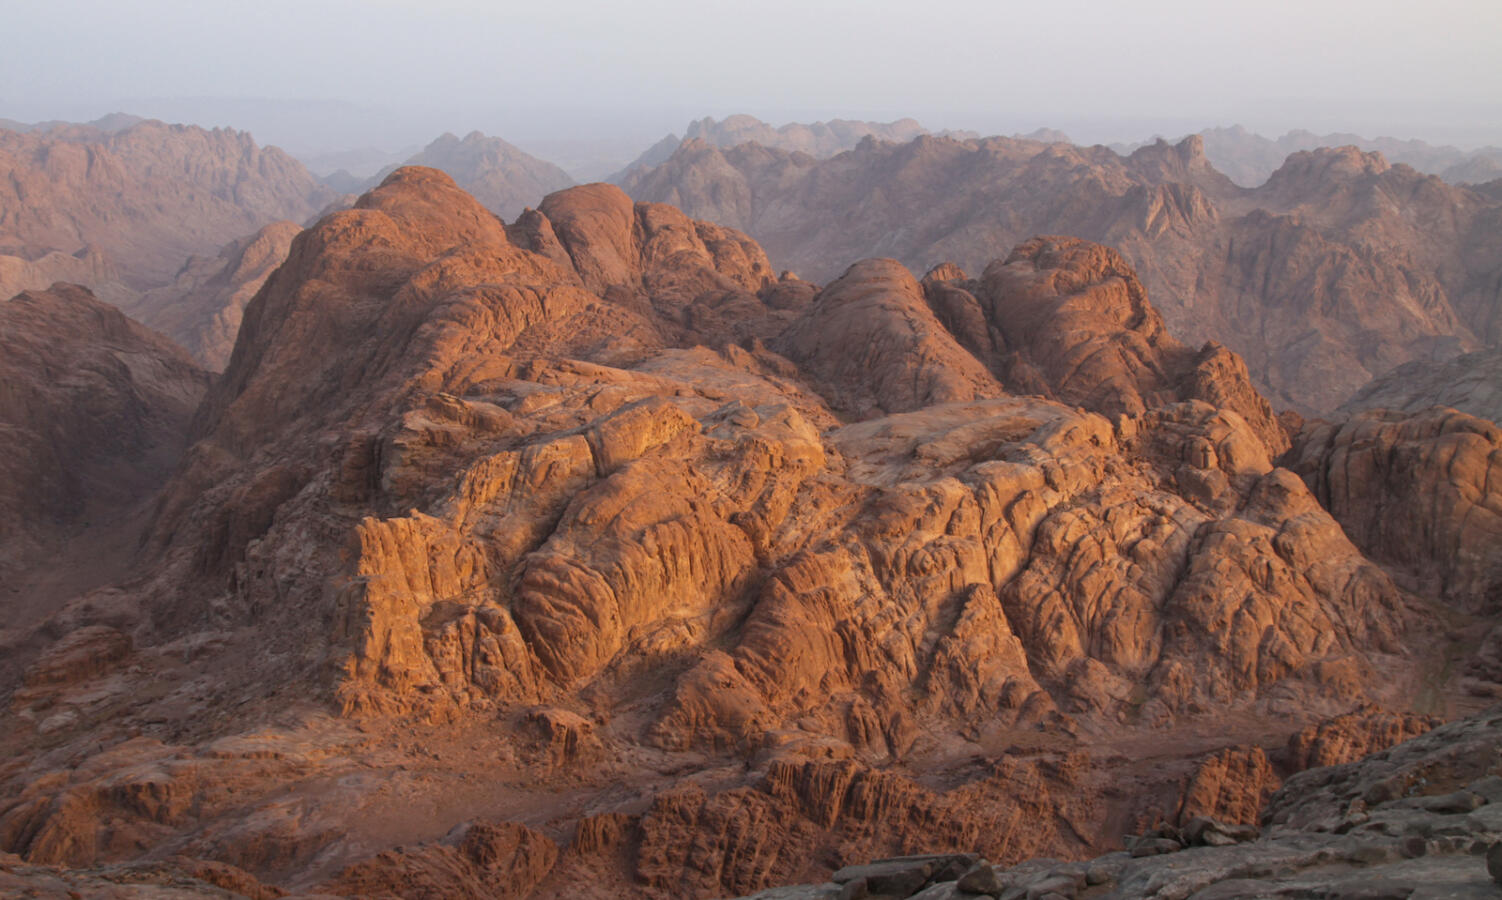 View from Mt. Sinai after sunrise.